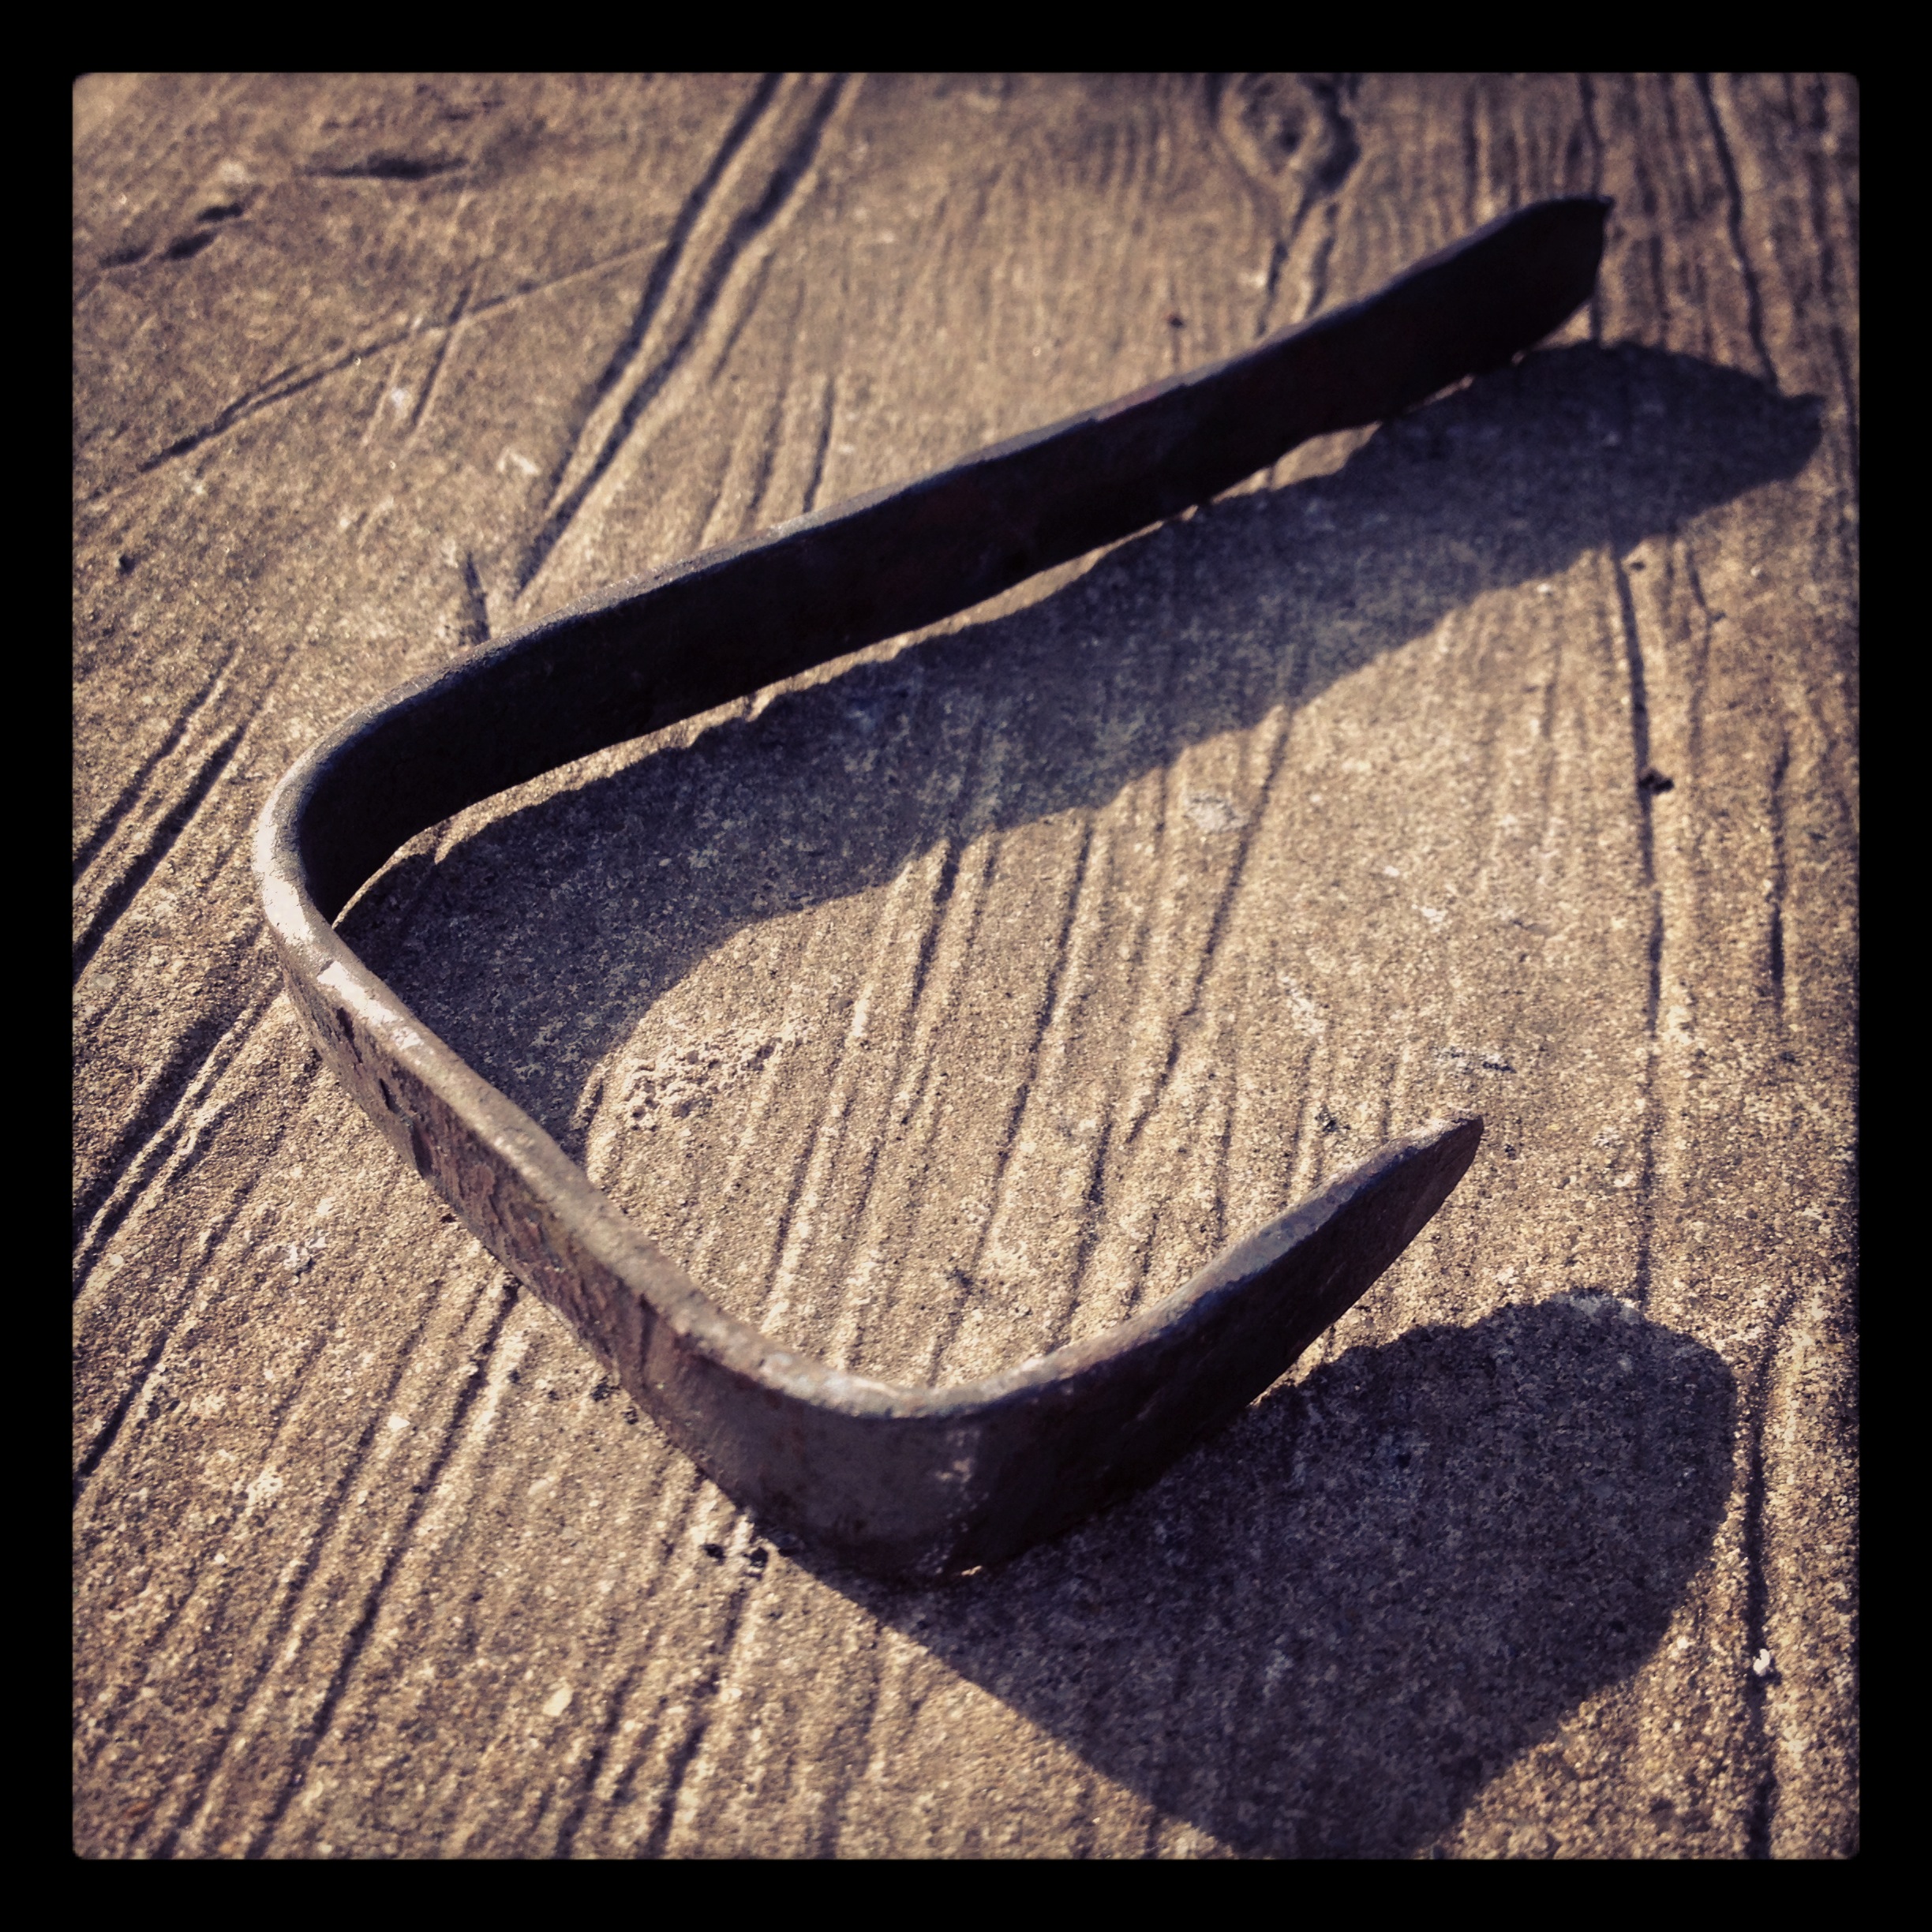 Day 6 blacksmithing project: a hook